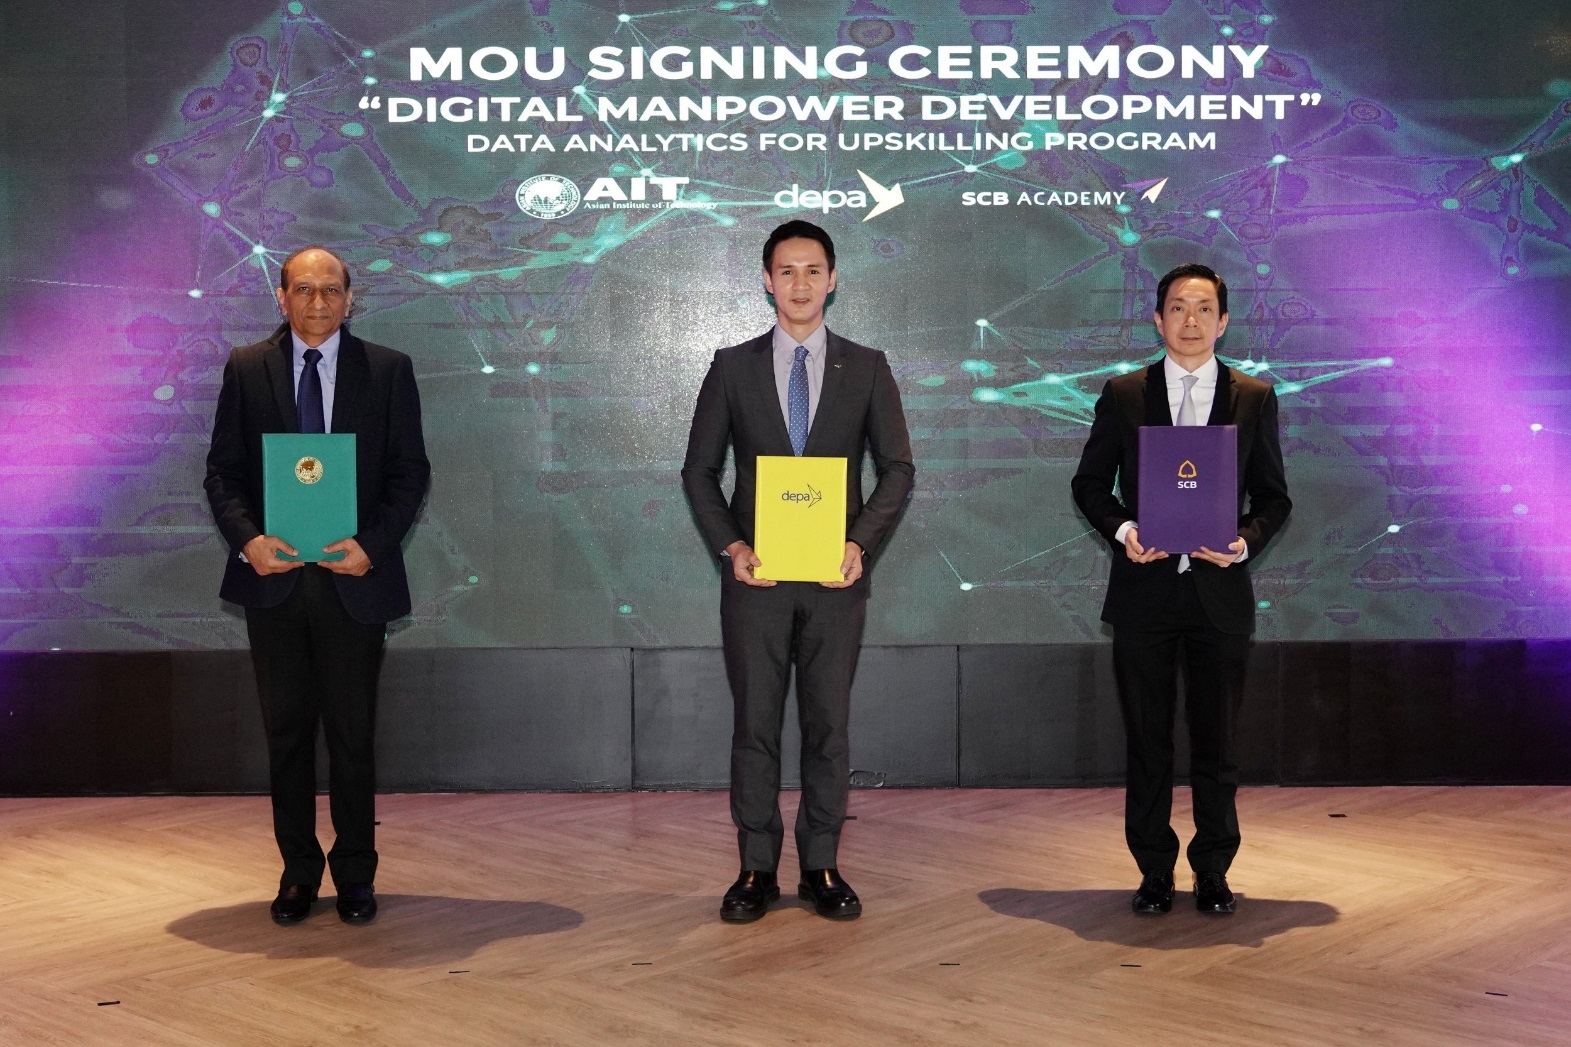 SCB teams up with depa and AIT in Digital Manpower Development Data Analytics for Upskilling program Aimed at enhancing data analytics skills in preparation for new normal challenges